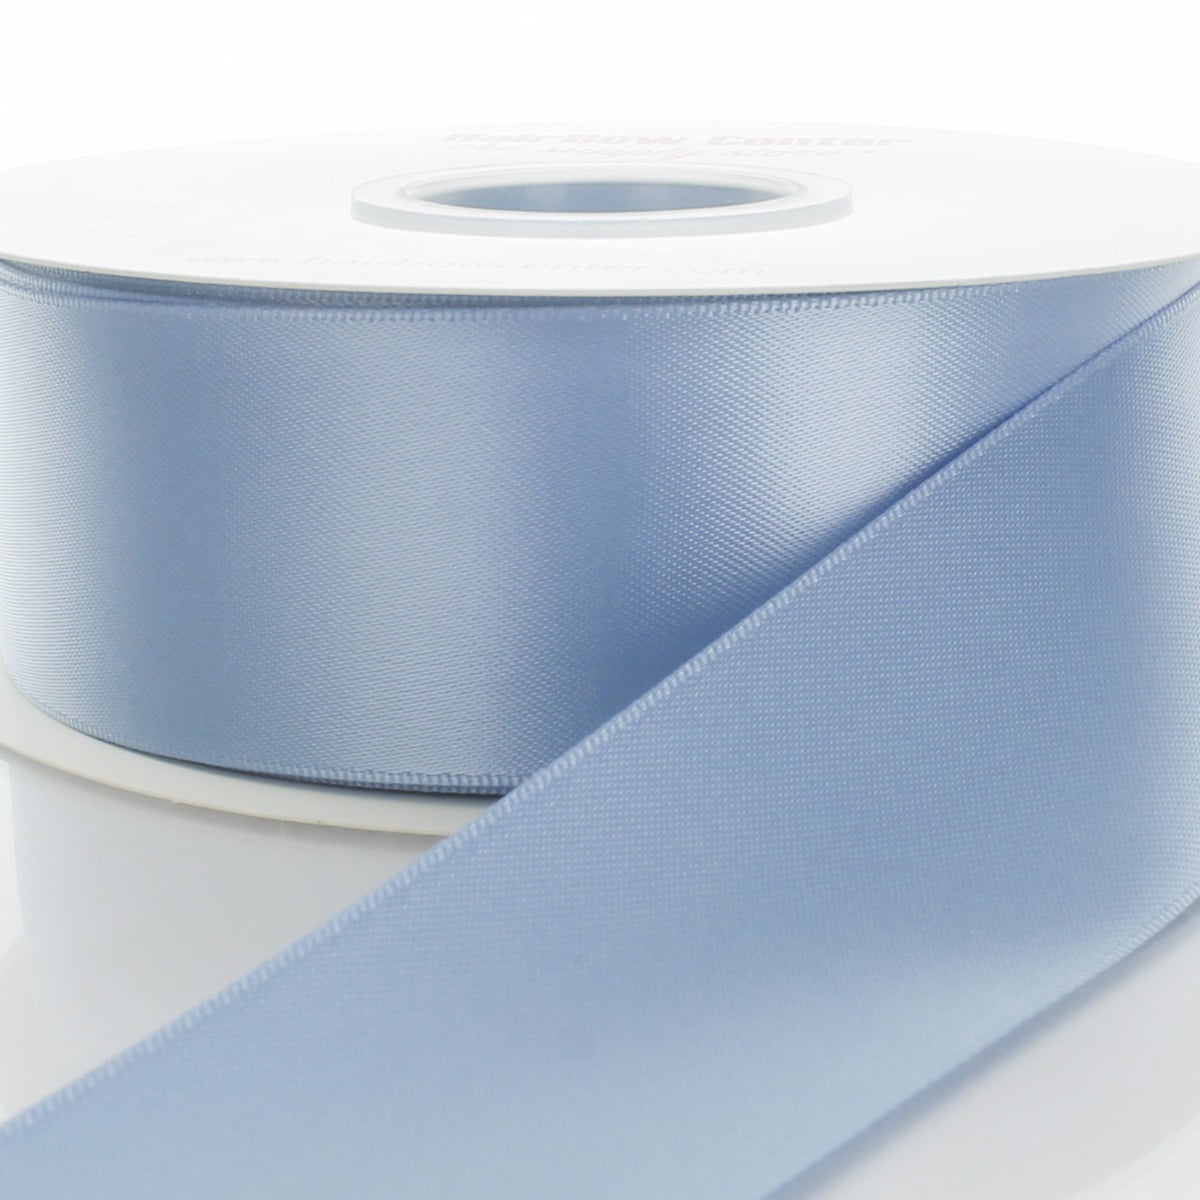 Double Faced Satin - 100 Yards - American Ribbon